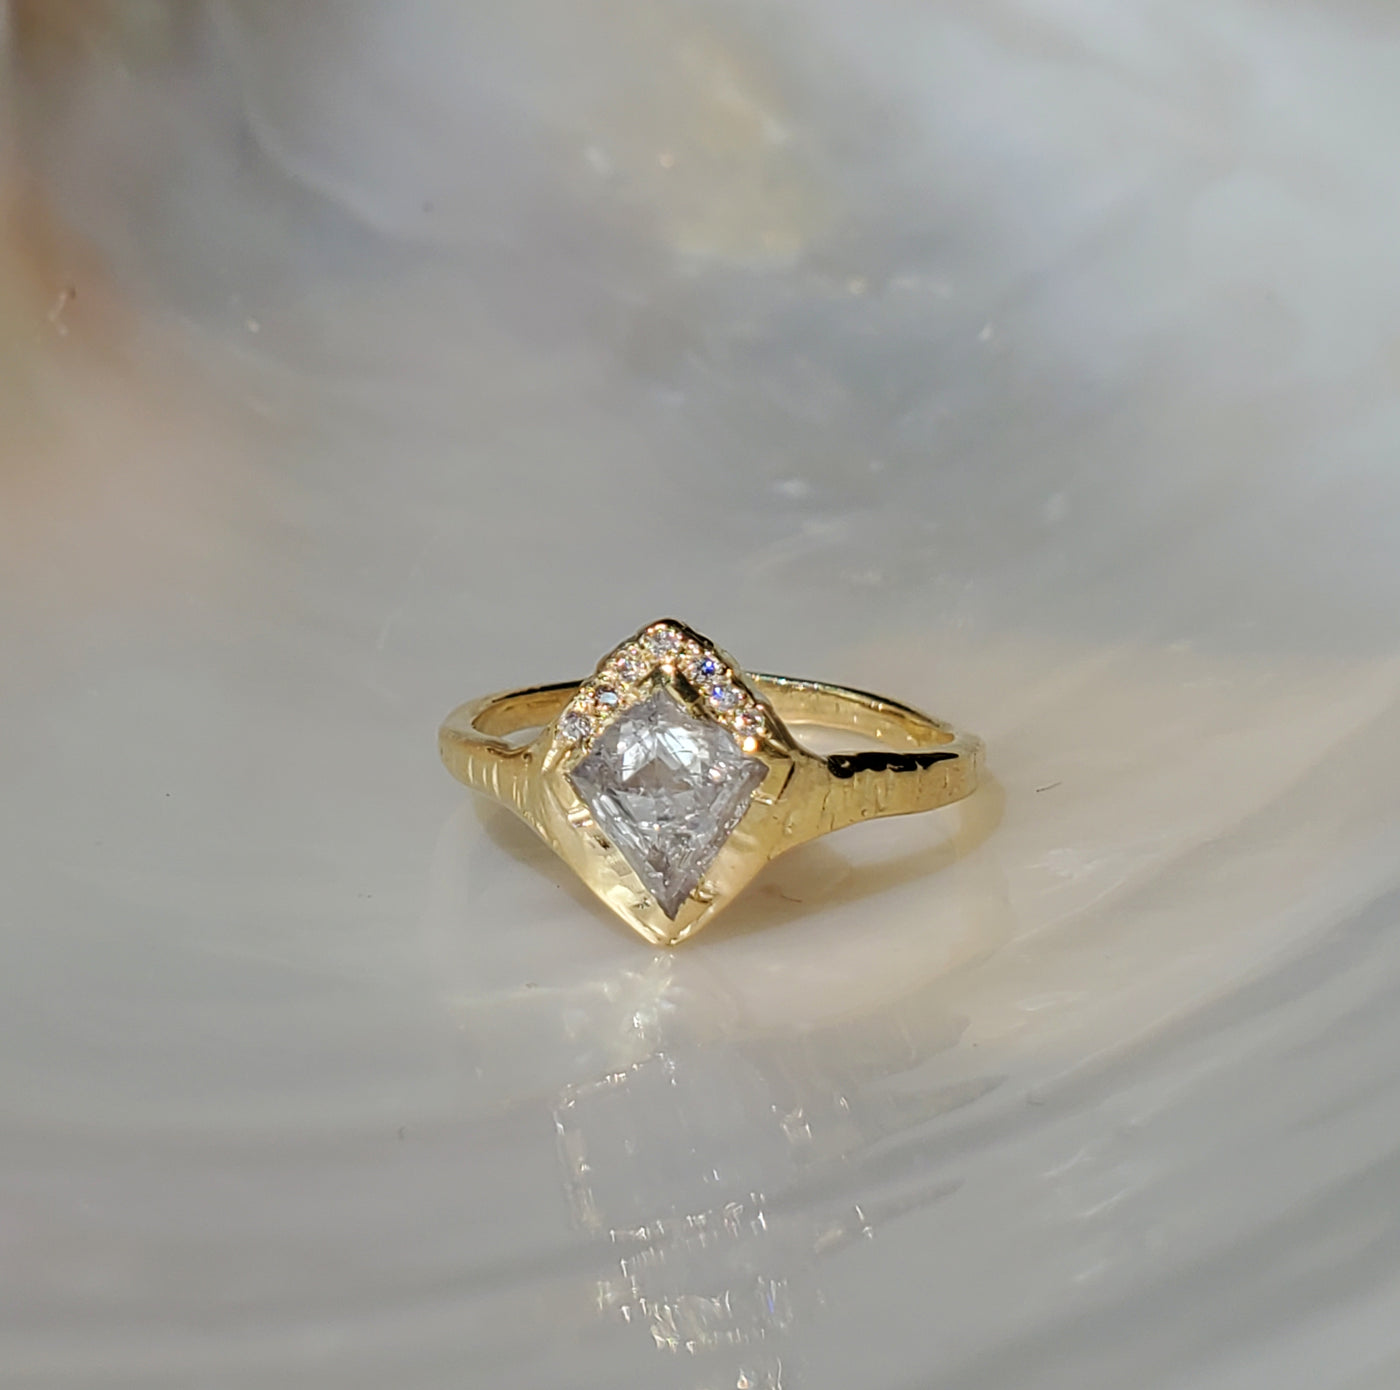 Custom Engagement Rings Guide | The Wedding Ring Shop | Local Honolulu,  Hawaii Fine Jewelry Store